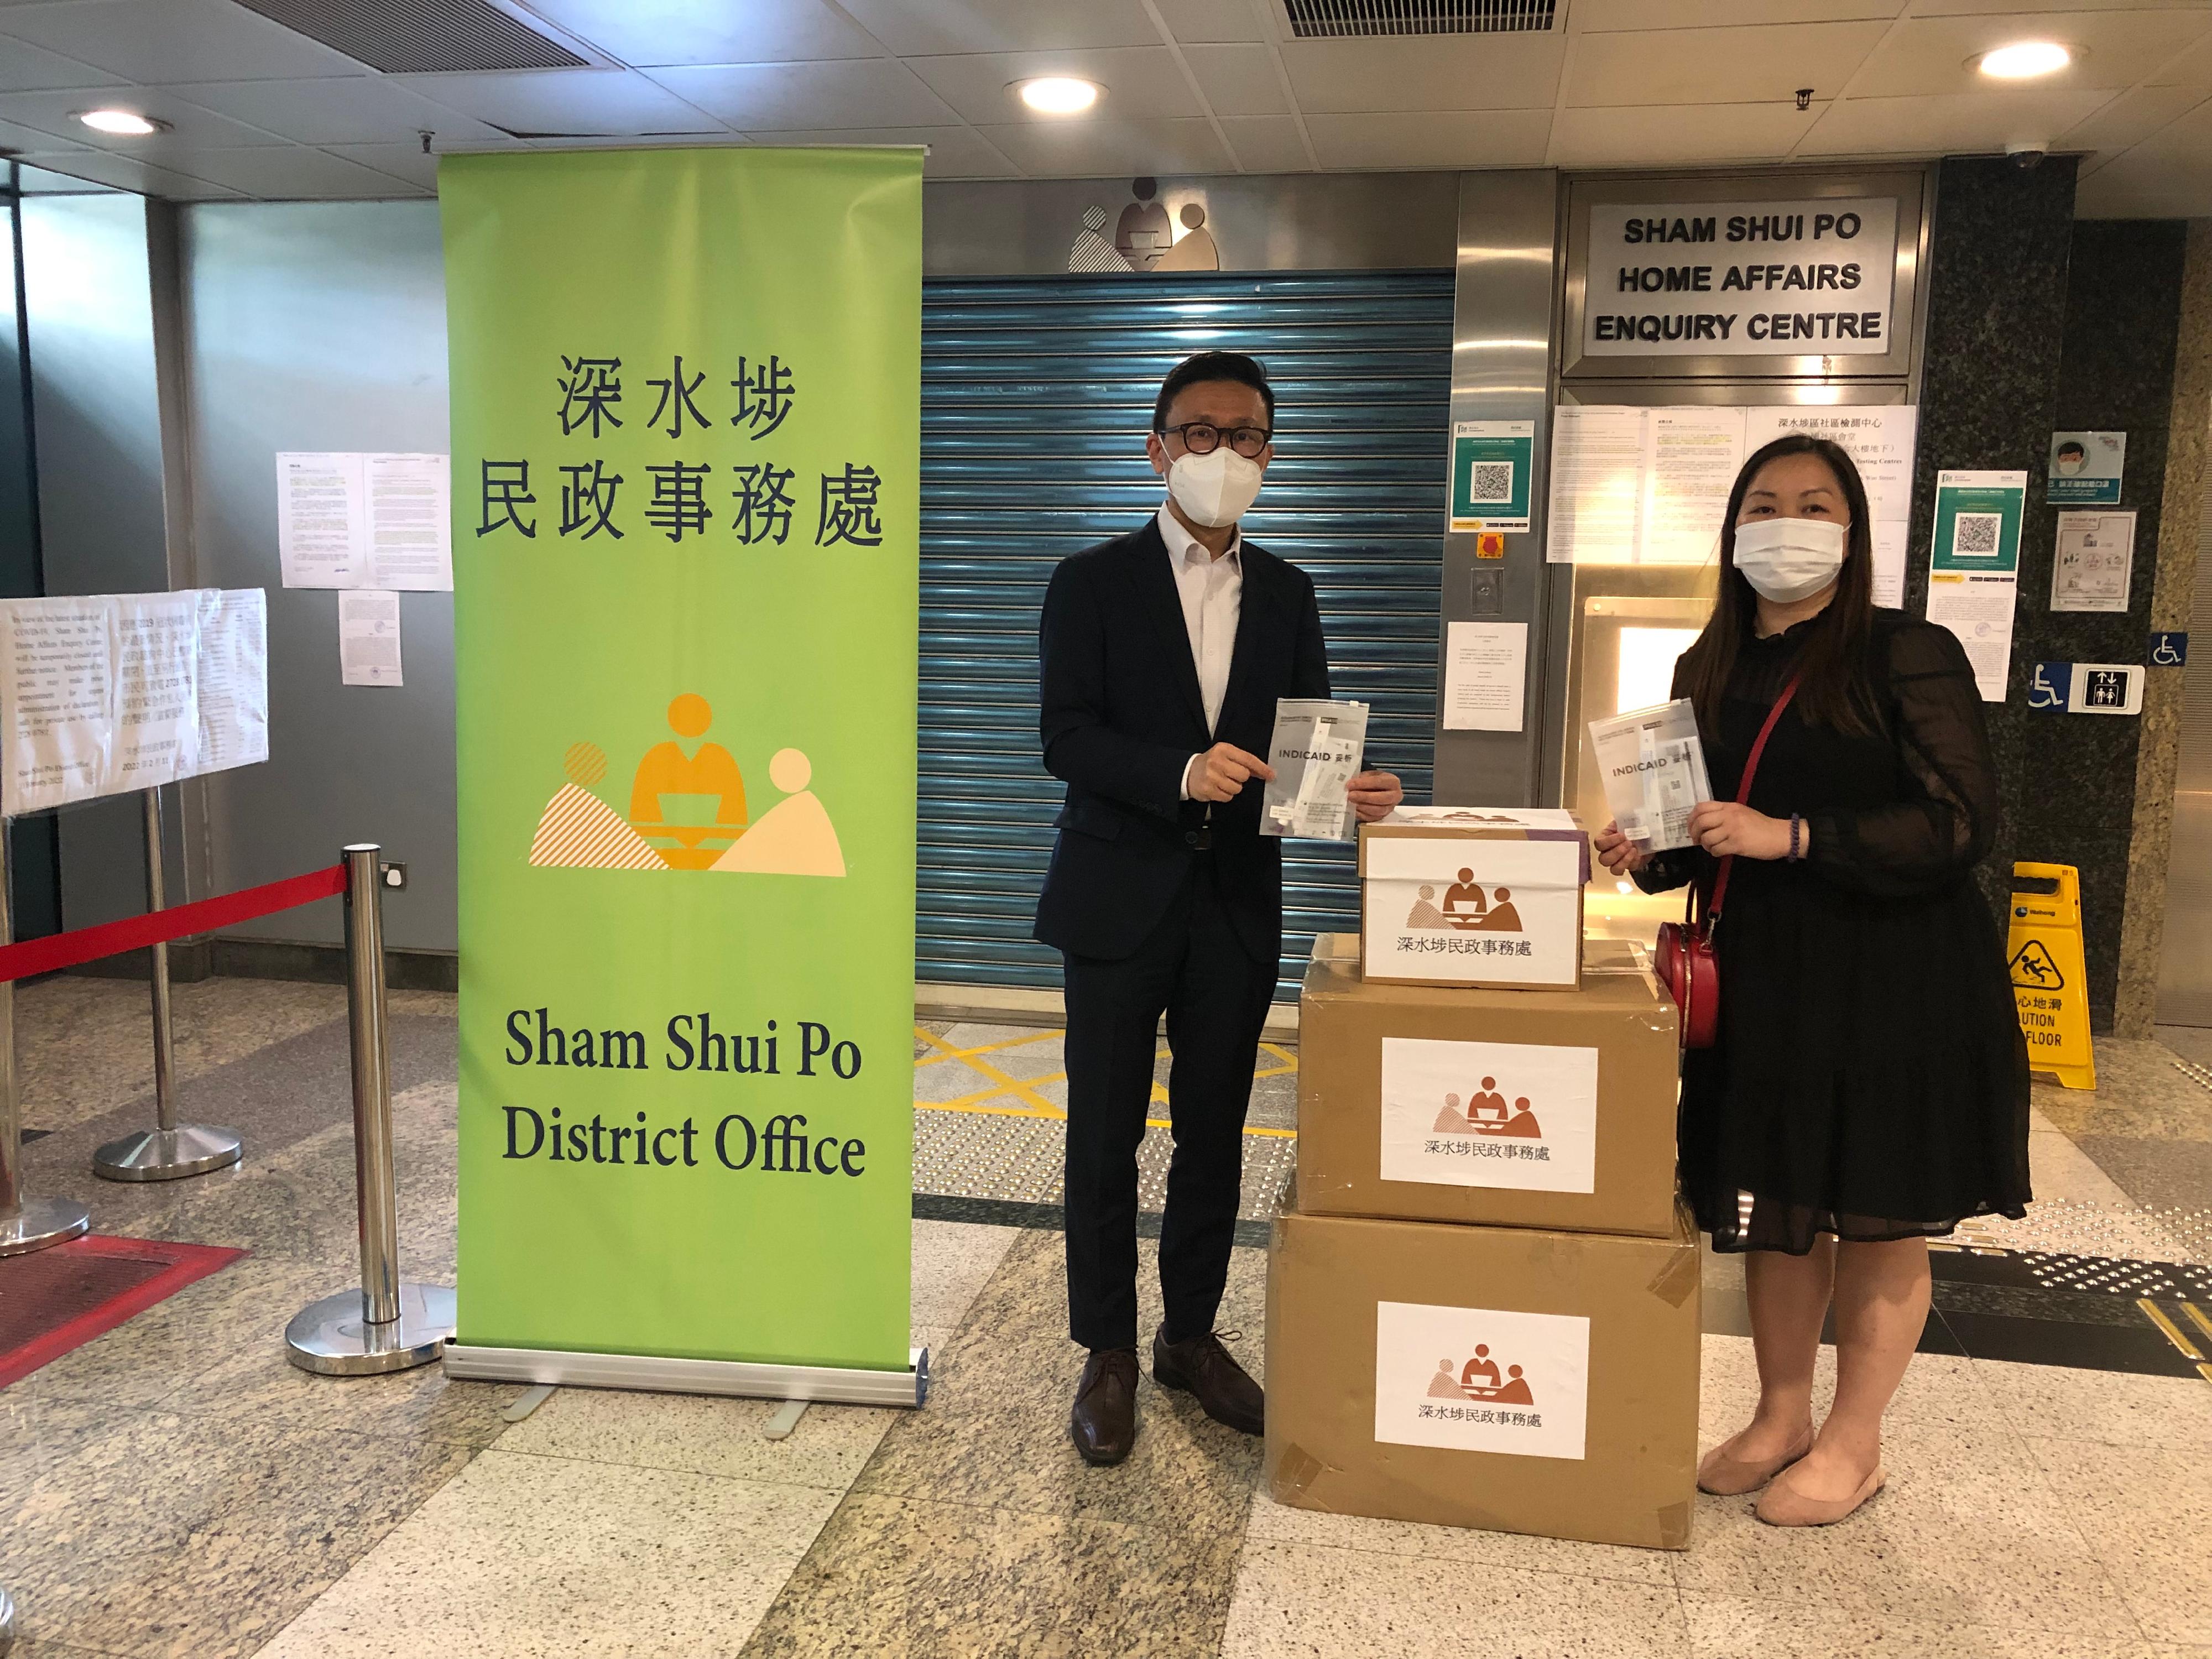 The Sham Shui Po District Office today (March 21) distributed COVID-19 rapid test kits to households, cleansing workers and property management staff living and working in Po Hei Court for voluntary testing through the property management company.